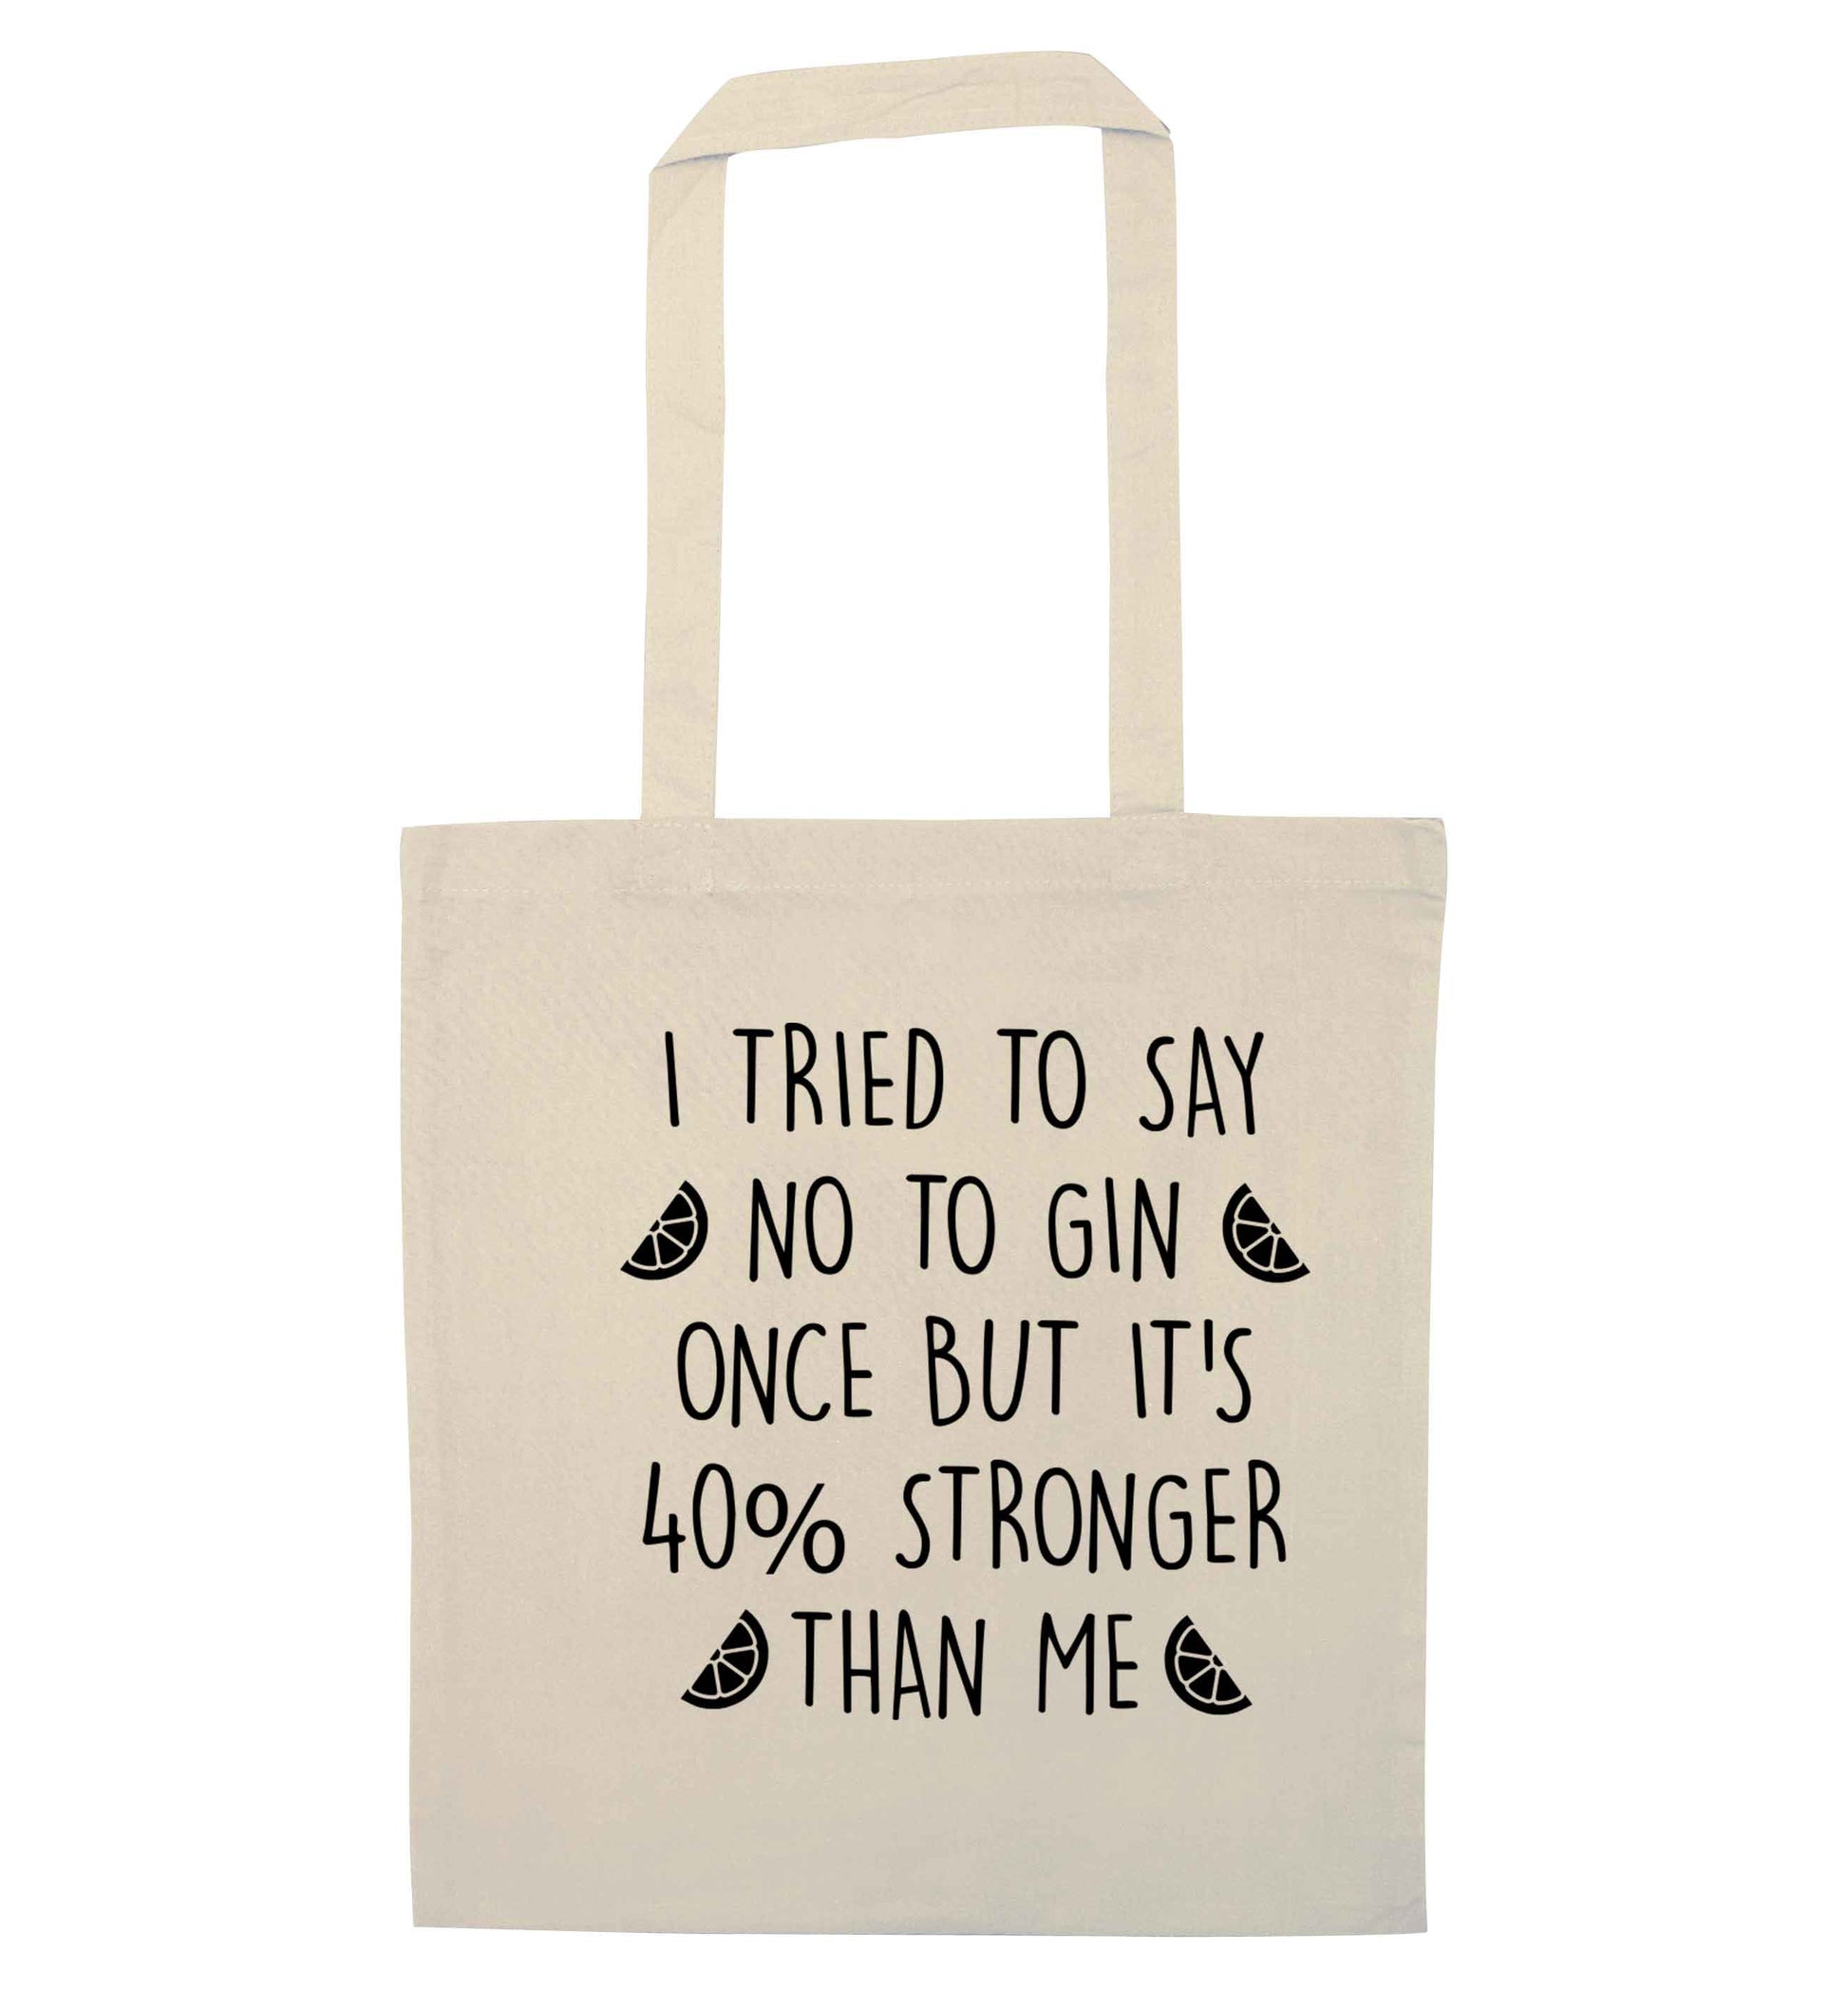 I tried to say no to gin once but it's 40% stronger than me natural tote bag